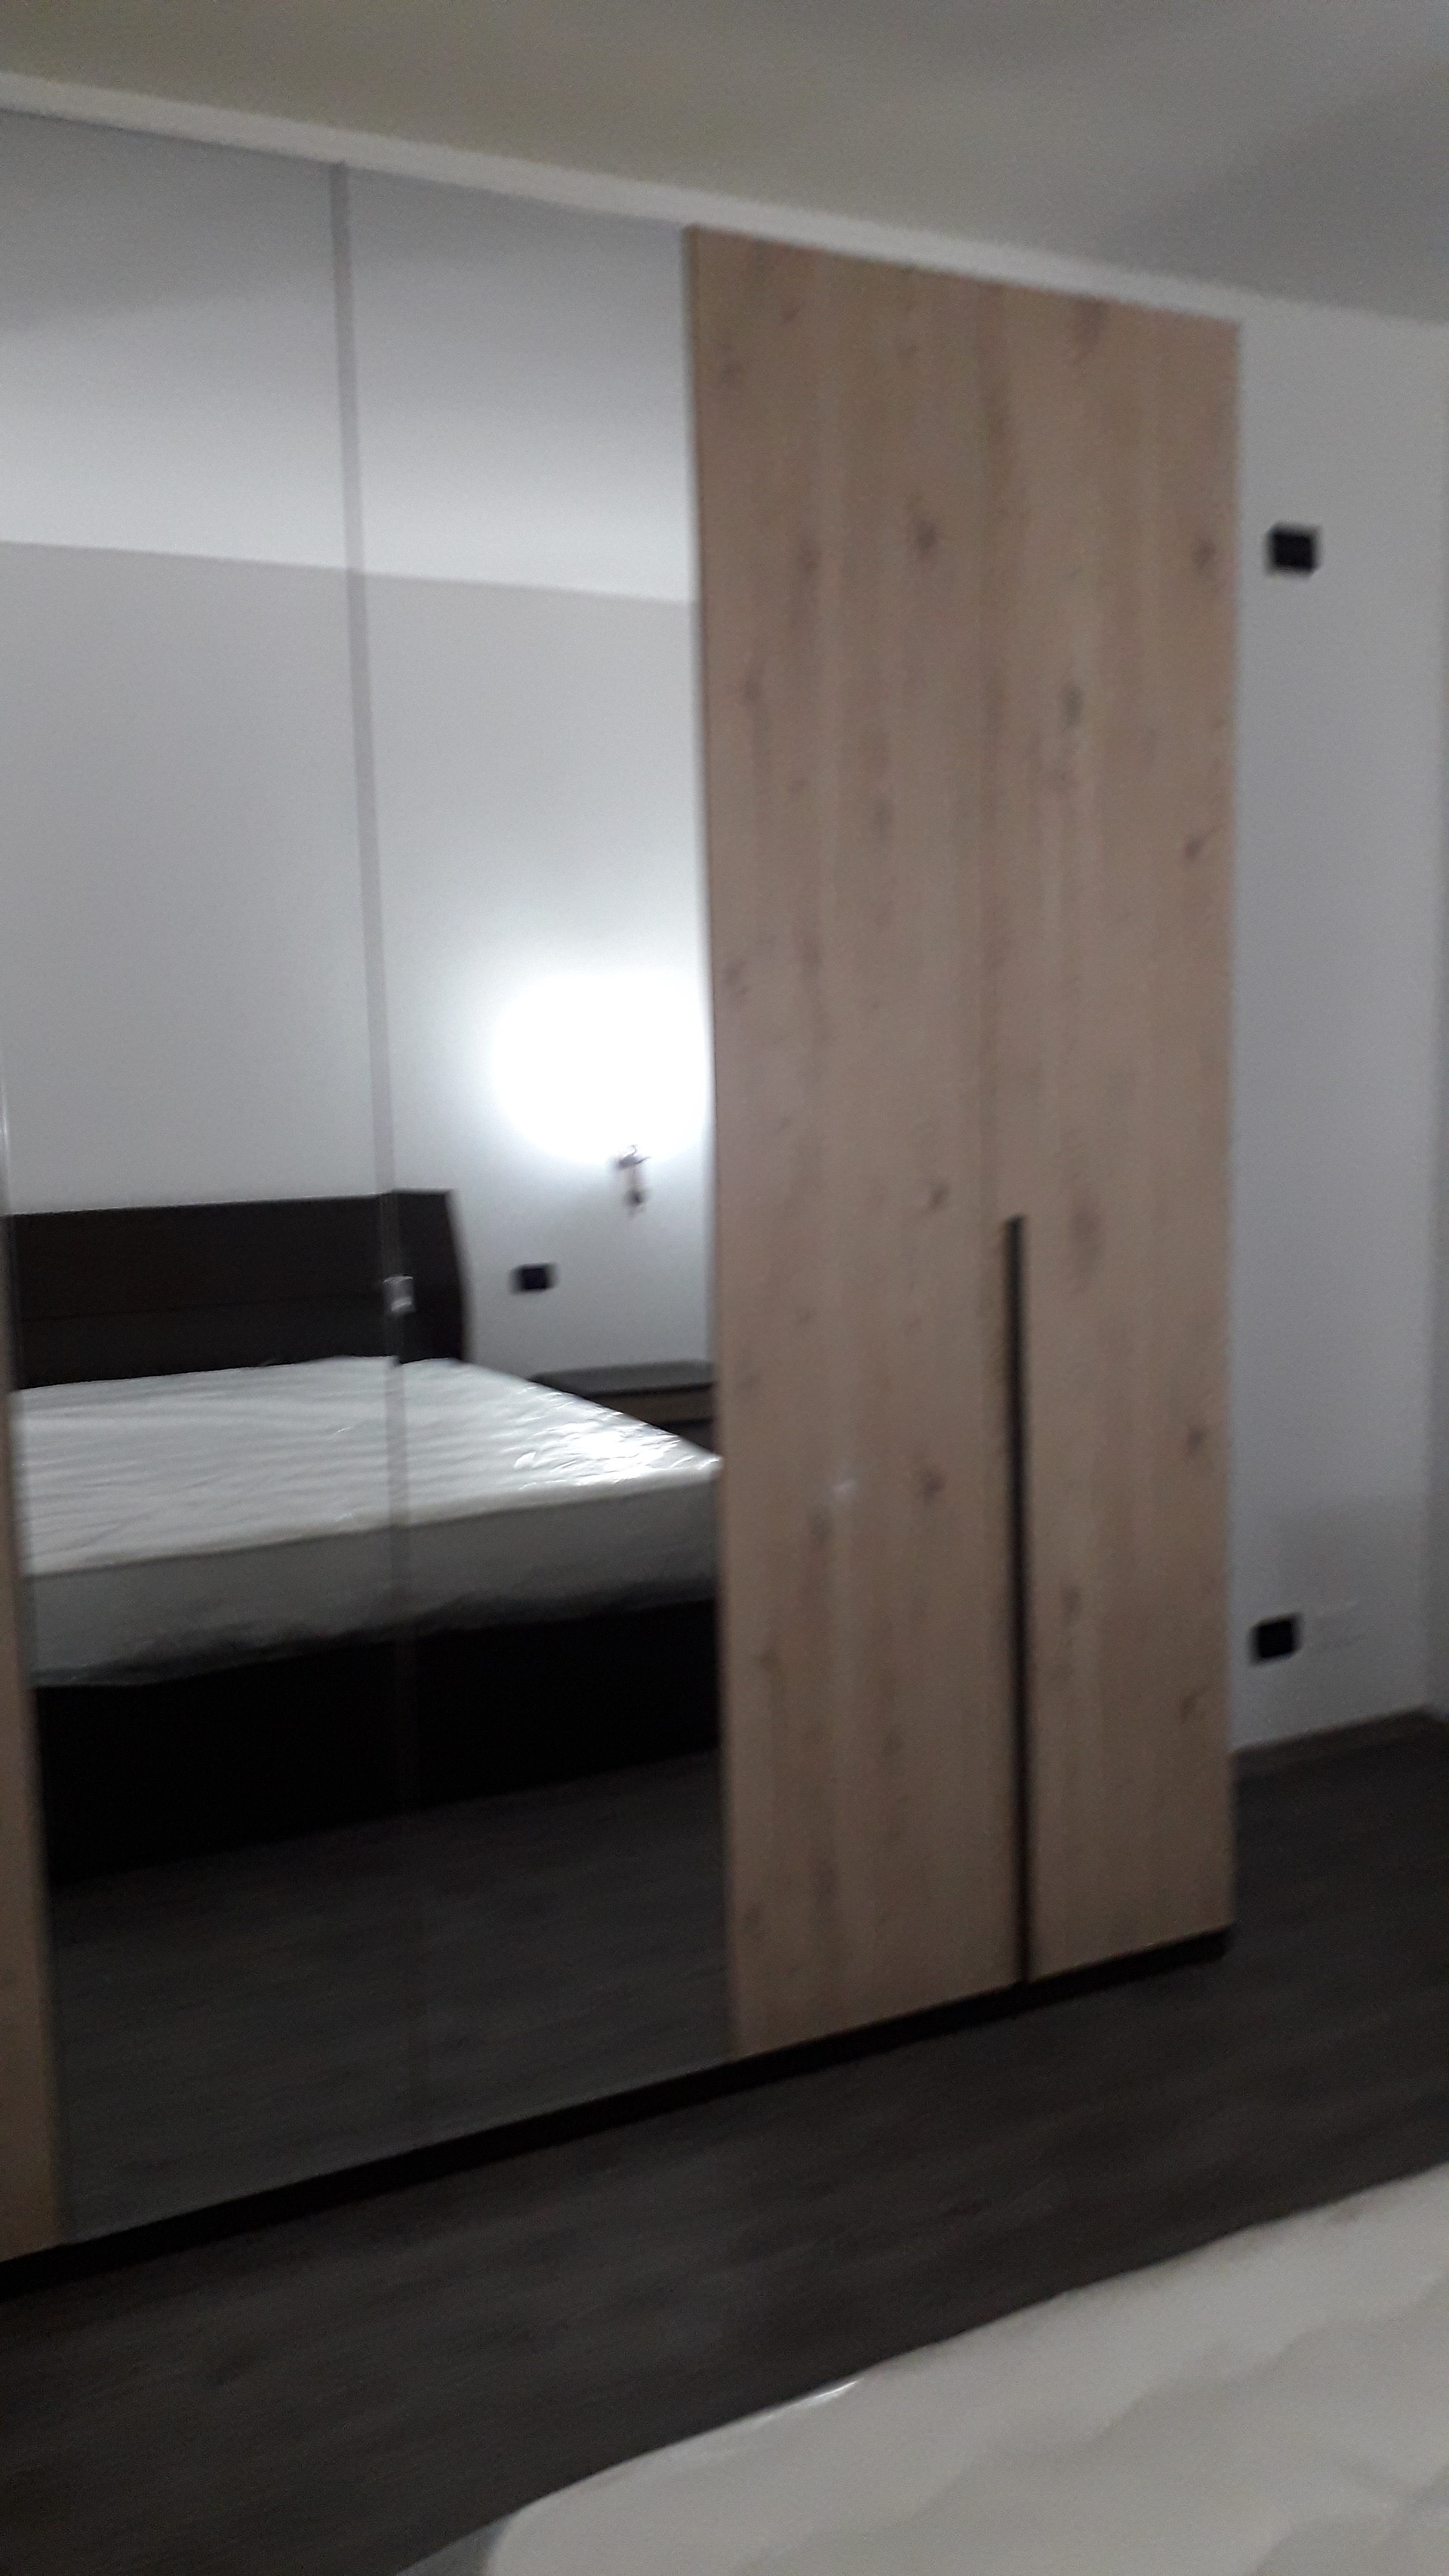 Room For Rent In 3 Bedroom House In Verona With Internet And